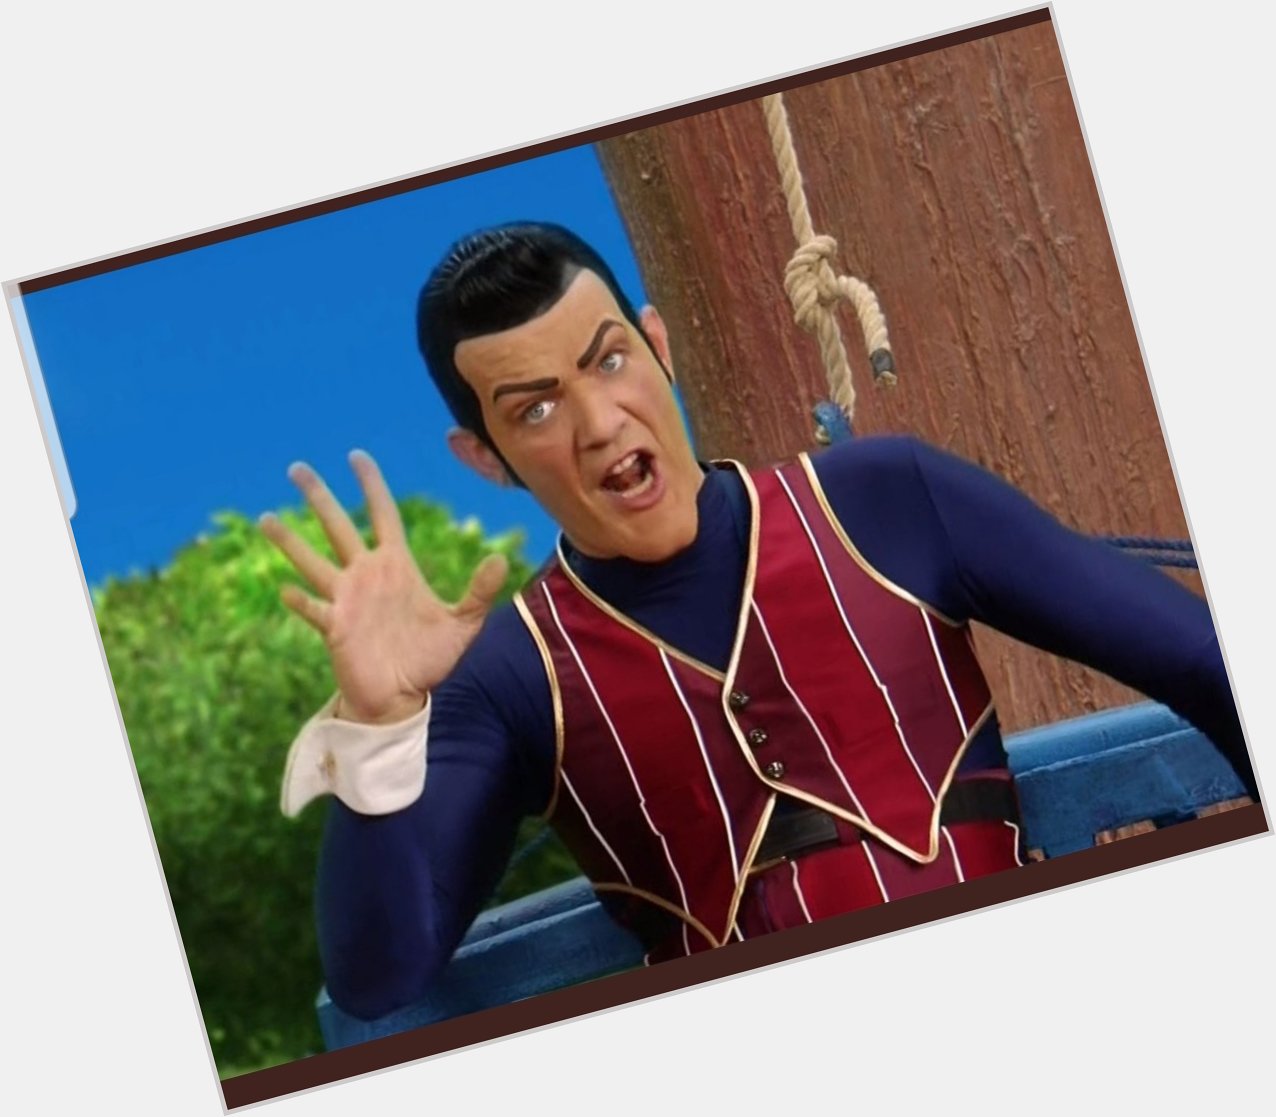 Happy birthday Stefán Karl stefánsson aka Robbie Rotten From Lazy Town you will always be number 1. 